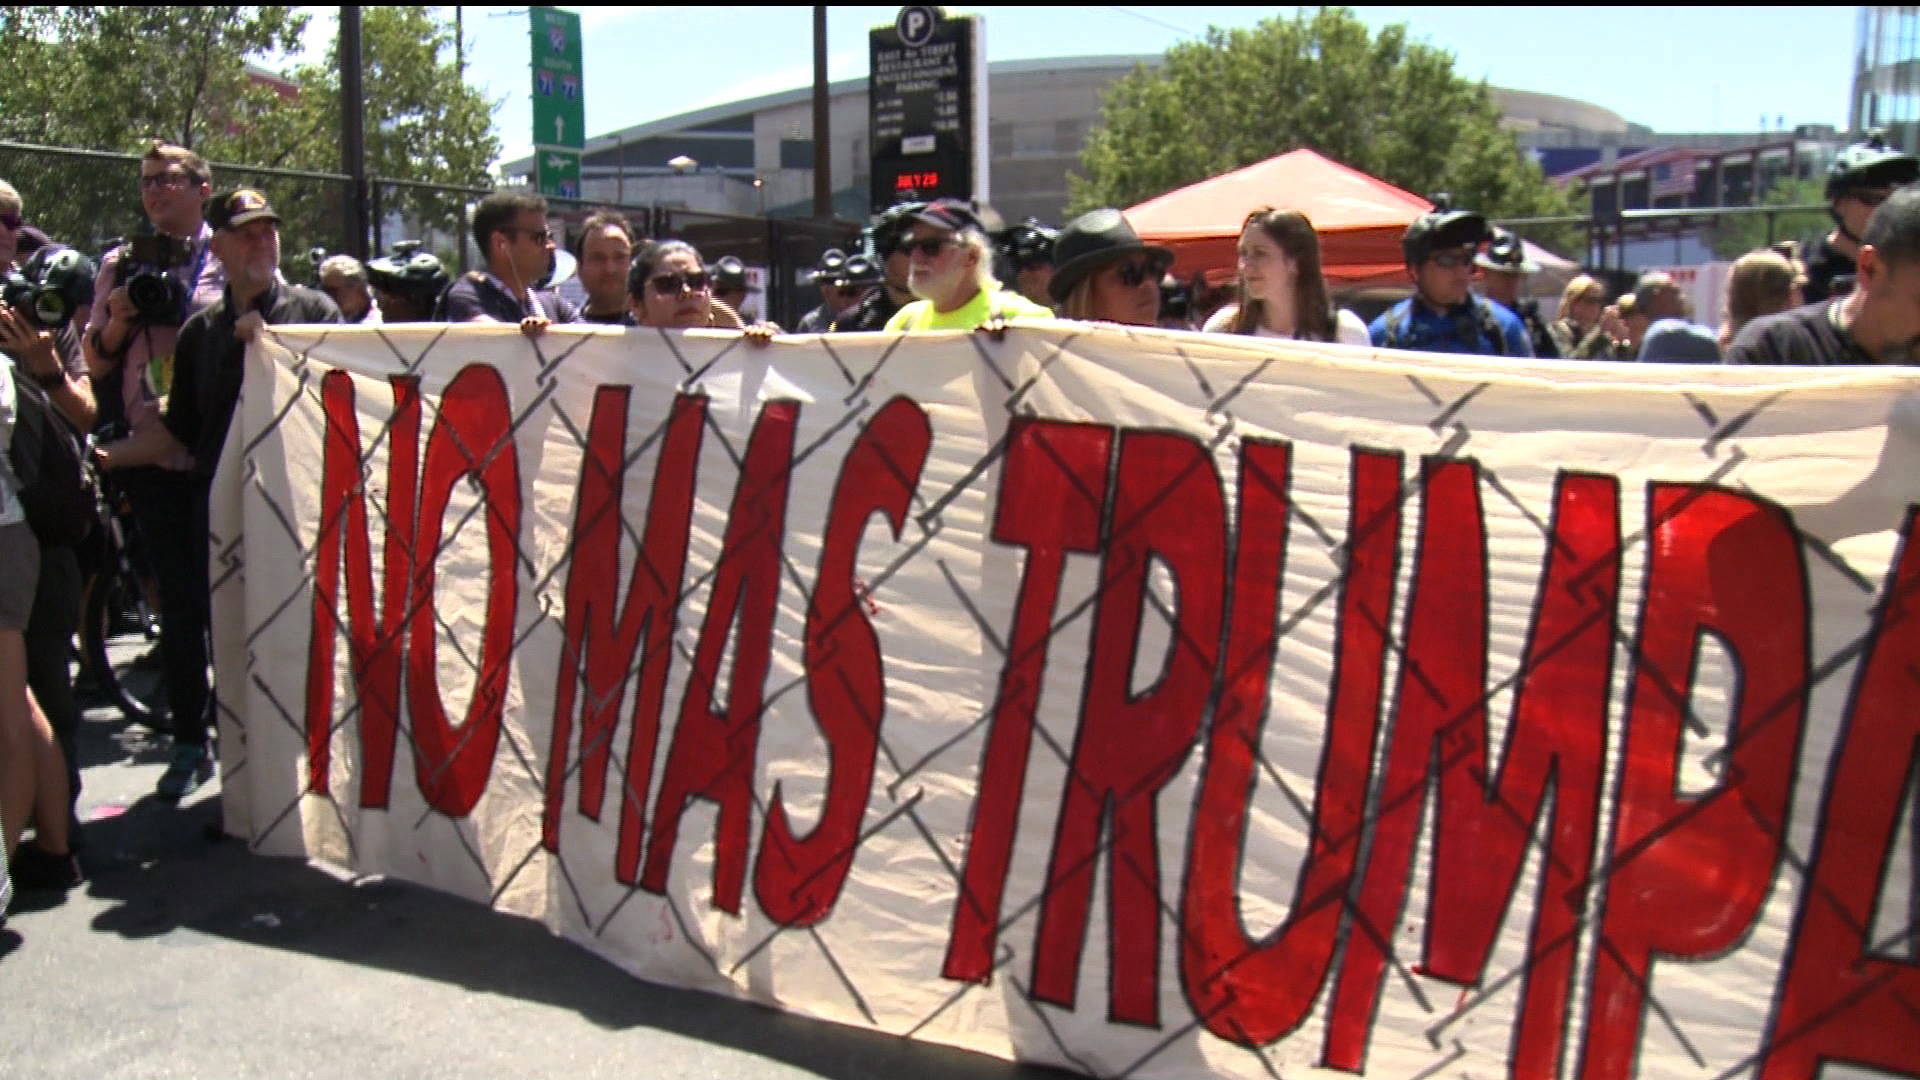 Activists Block RNC Entrance with Mock Border Wall So Trump’s Hate “Won’t Reach ...1920 x 1080